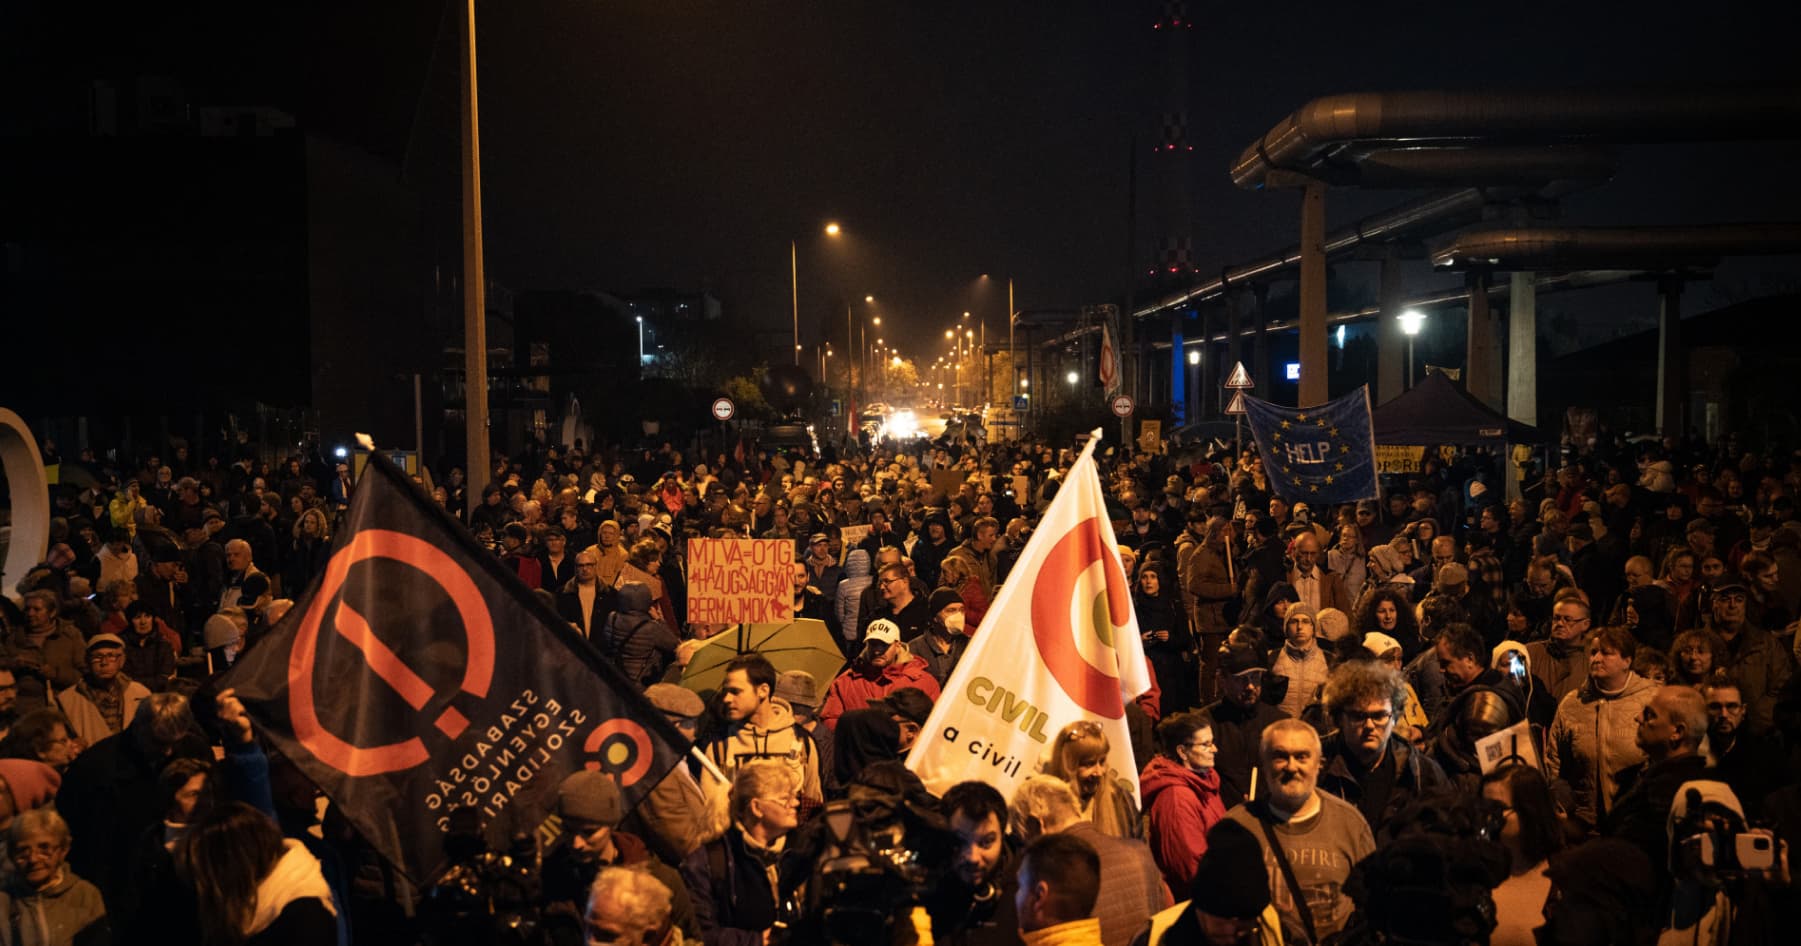 A rally against propaganda of Orban-controlled media under pro-Ukrainian slogans was held in Budapest